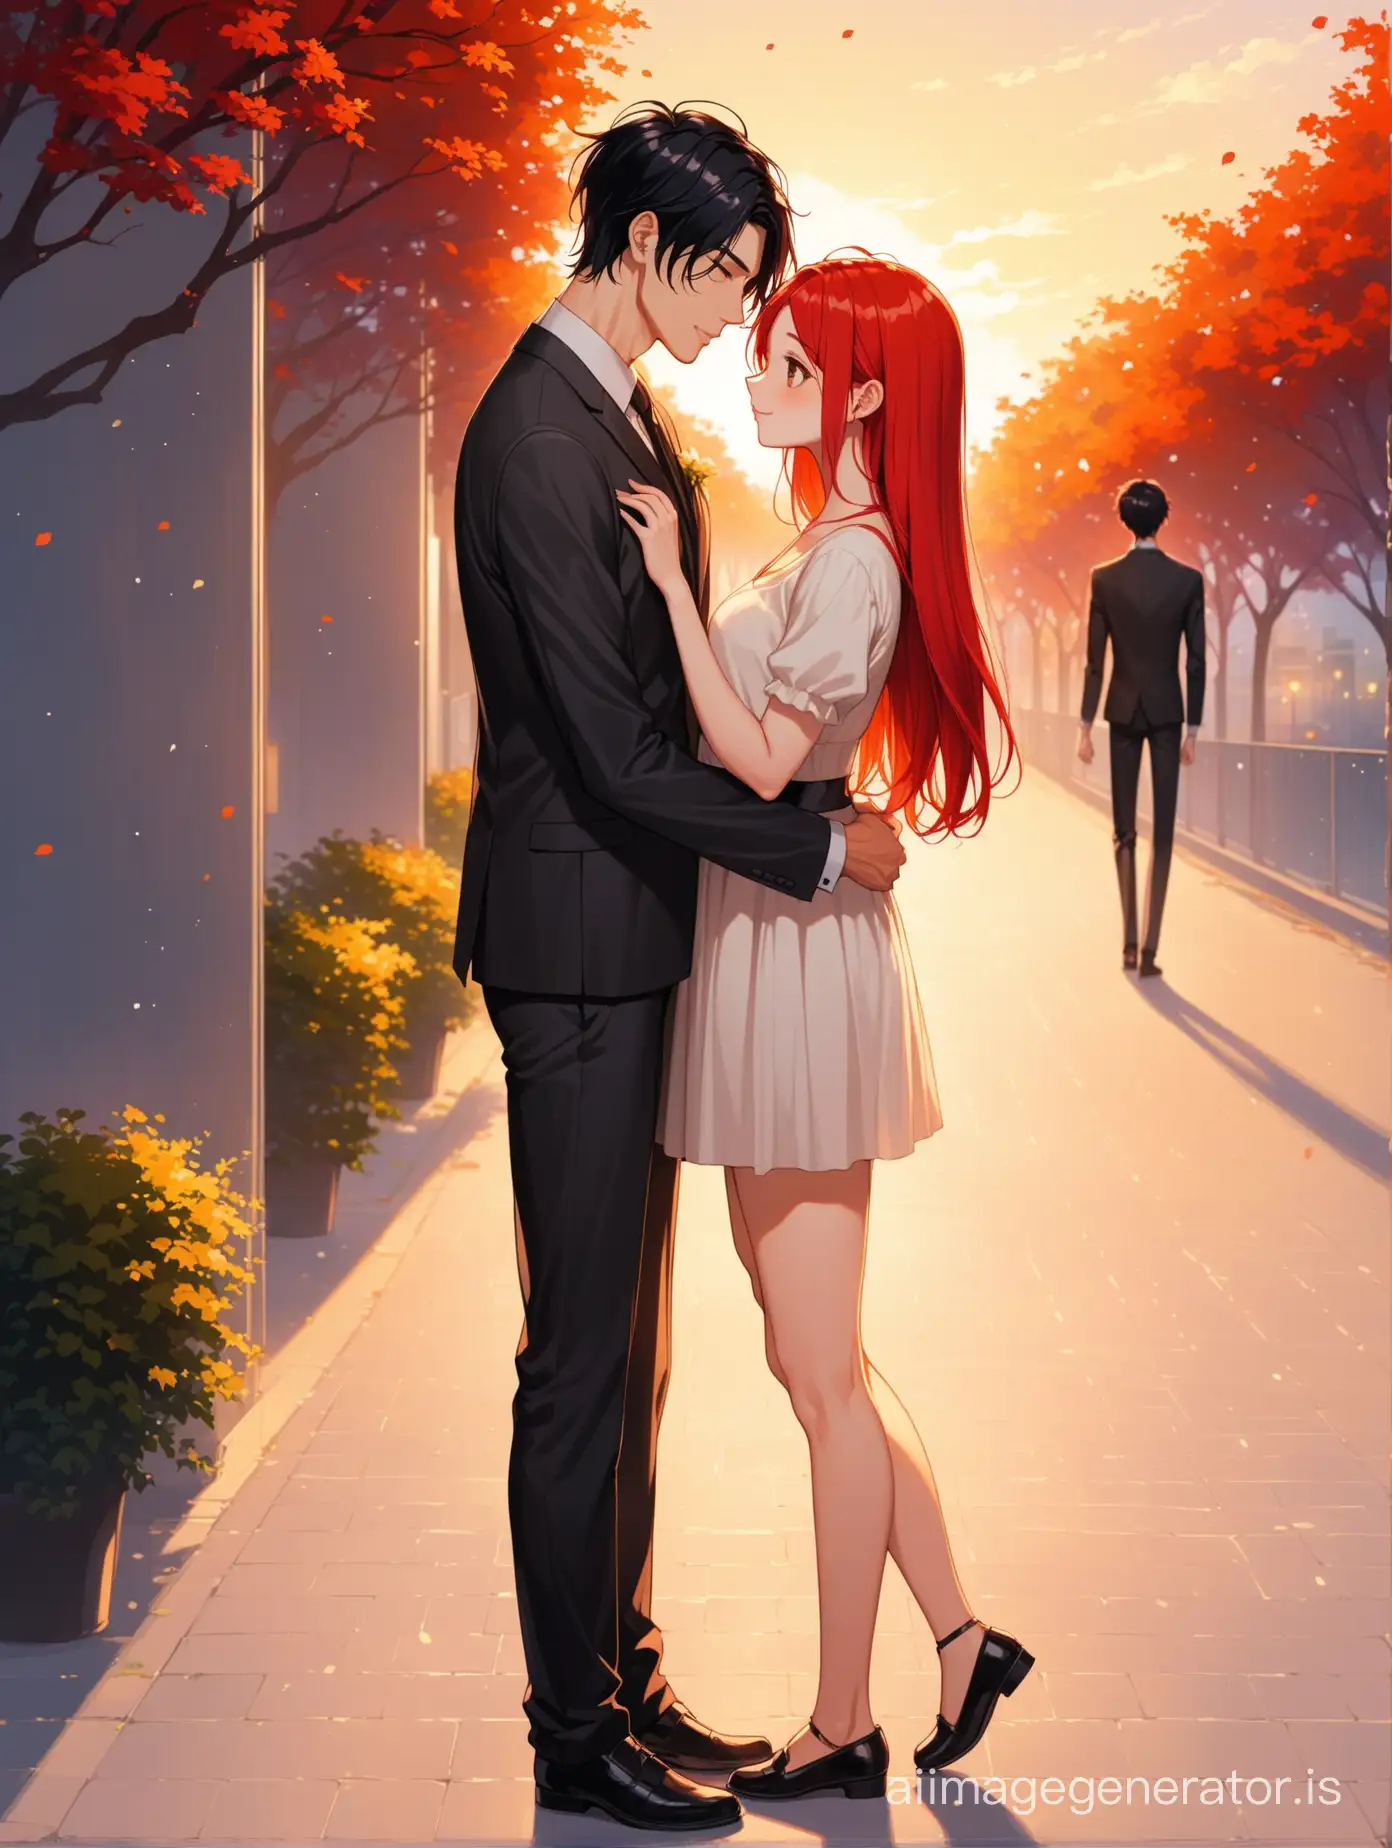 In love couple, short girl with bright red hair and tall, slender guy with black hair